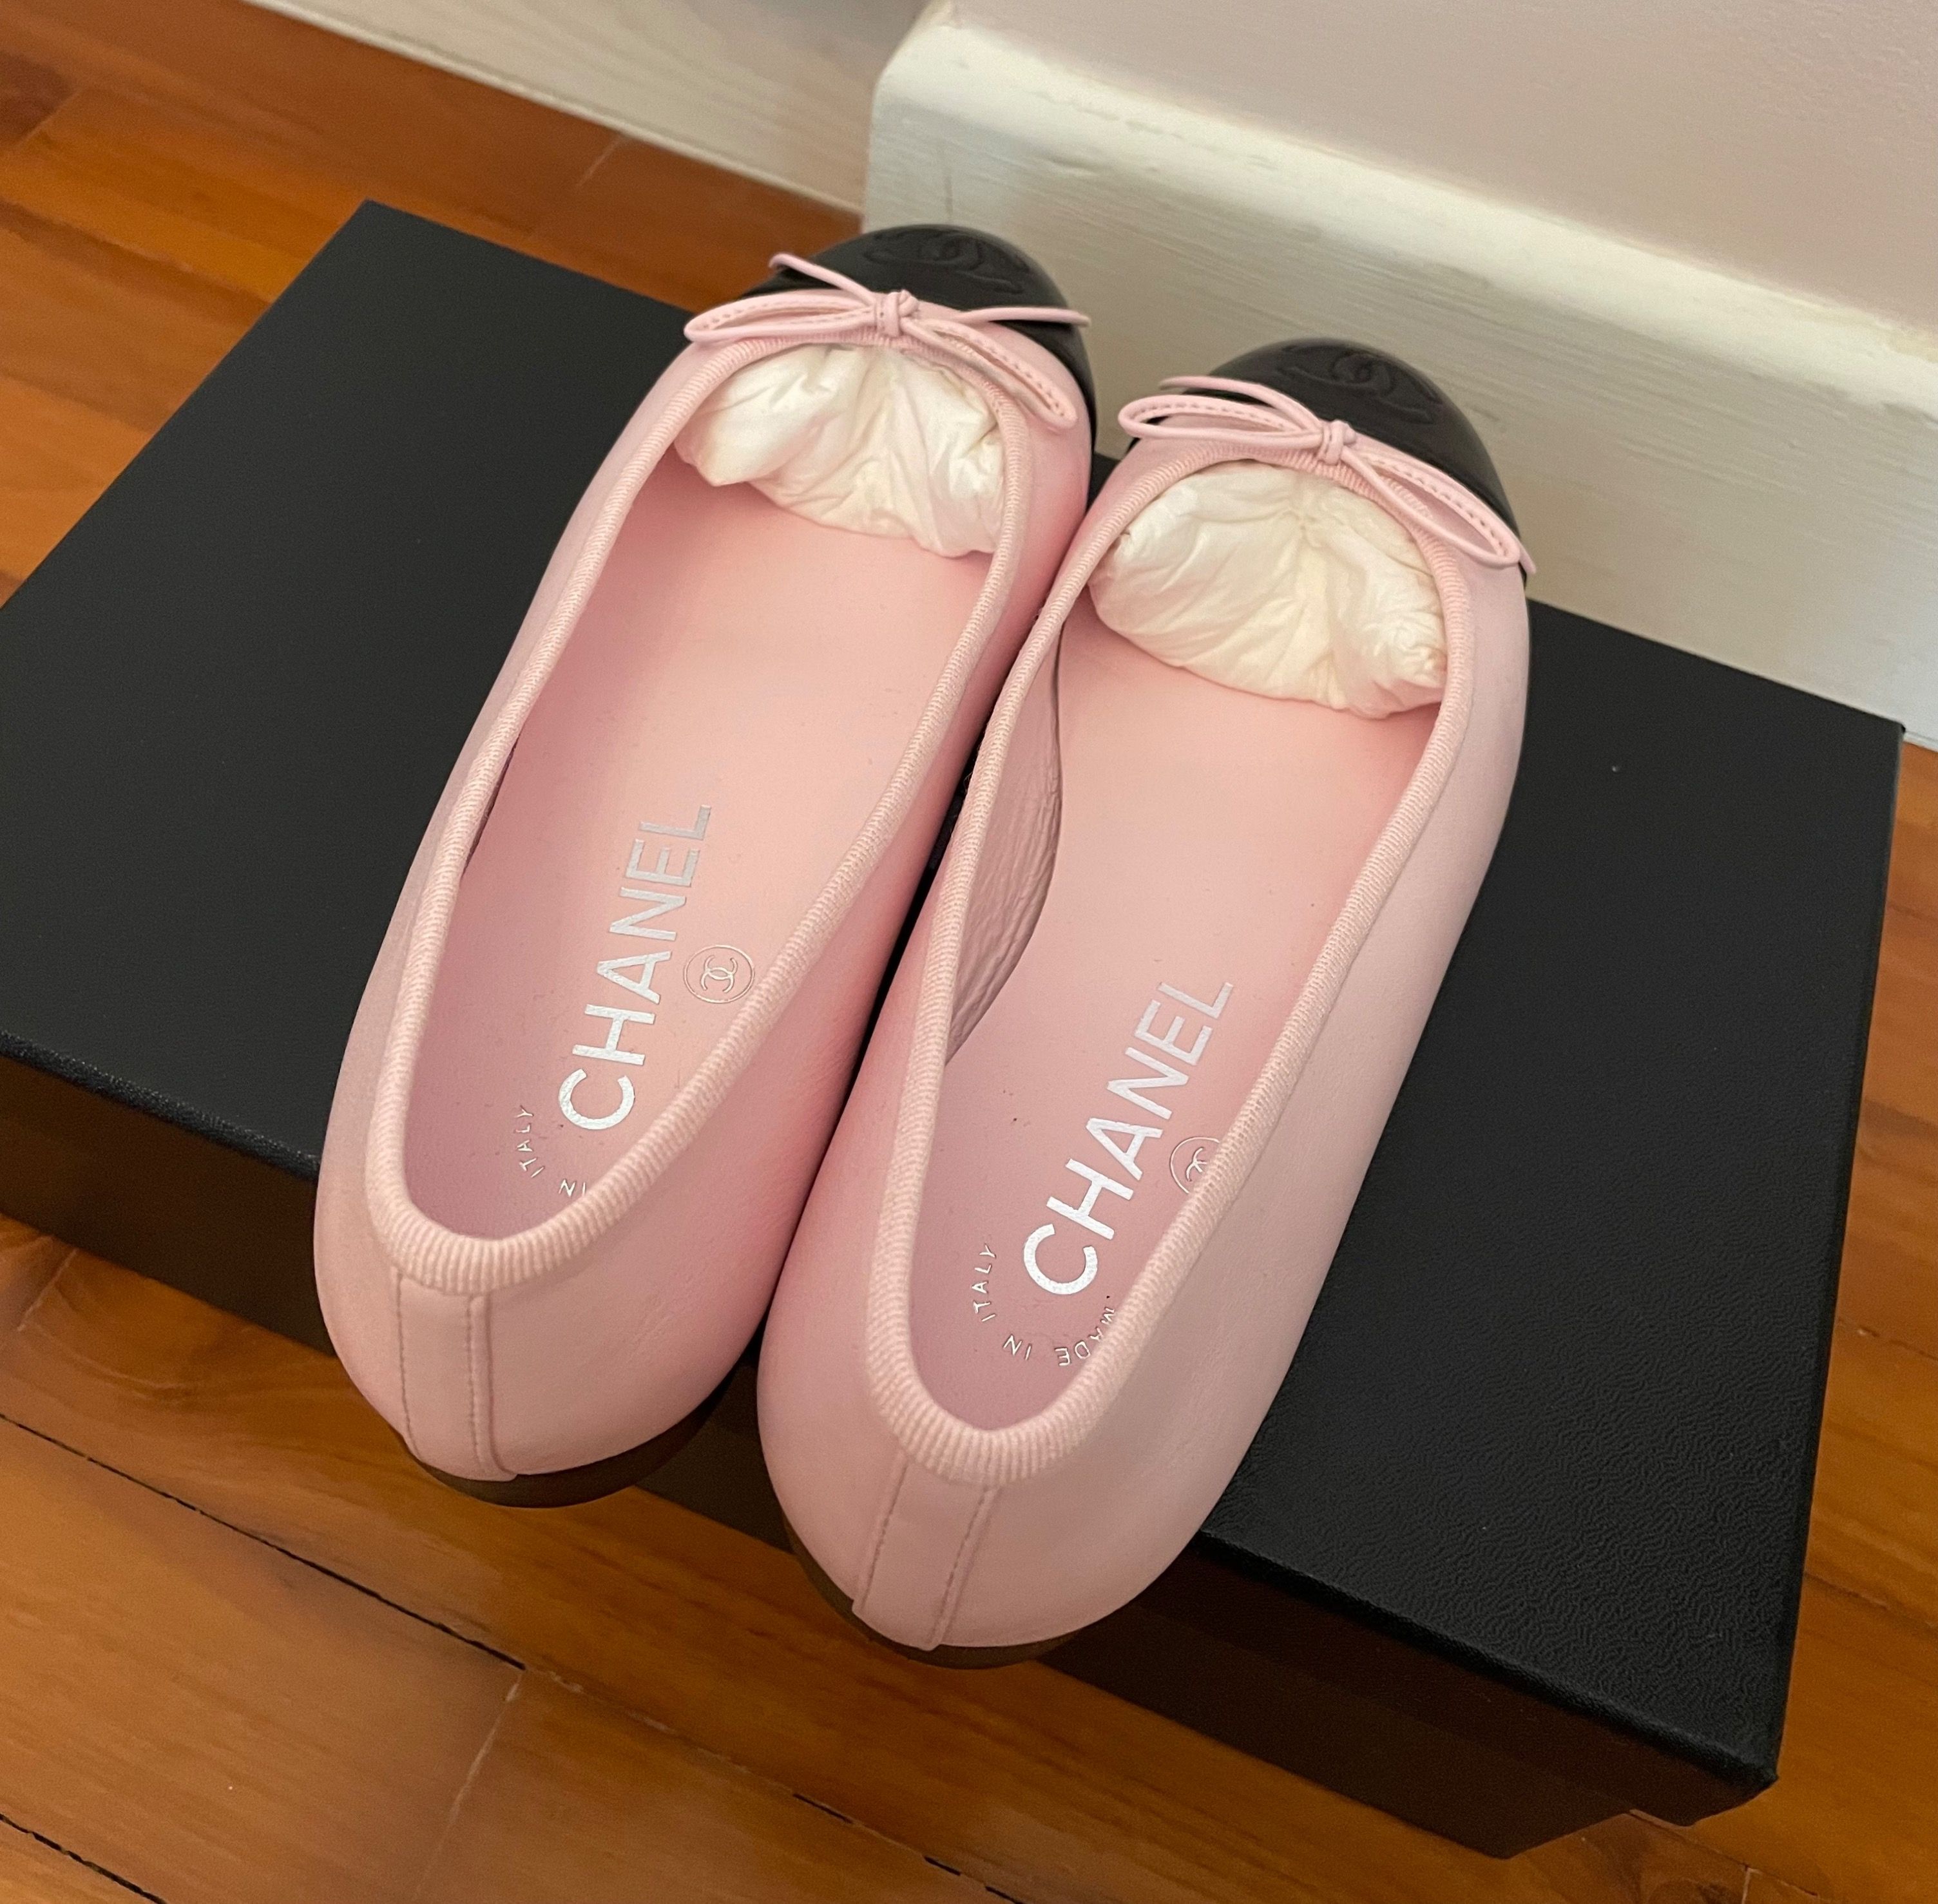 Chanel Pink Leather CC Bow Ballet Flats Size 40